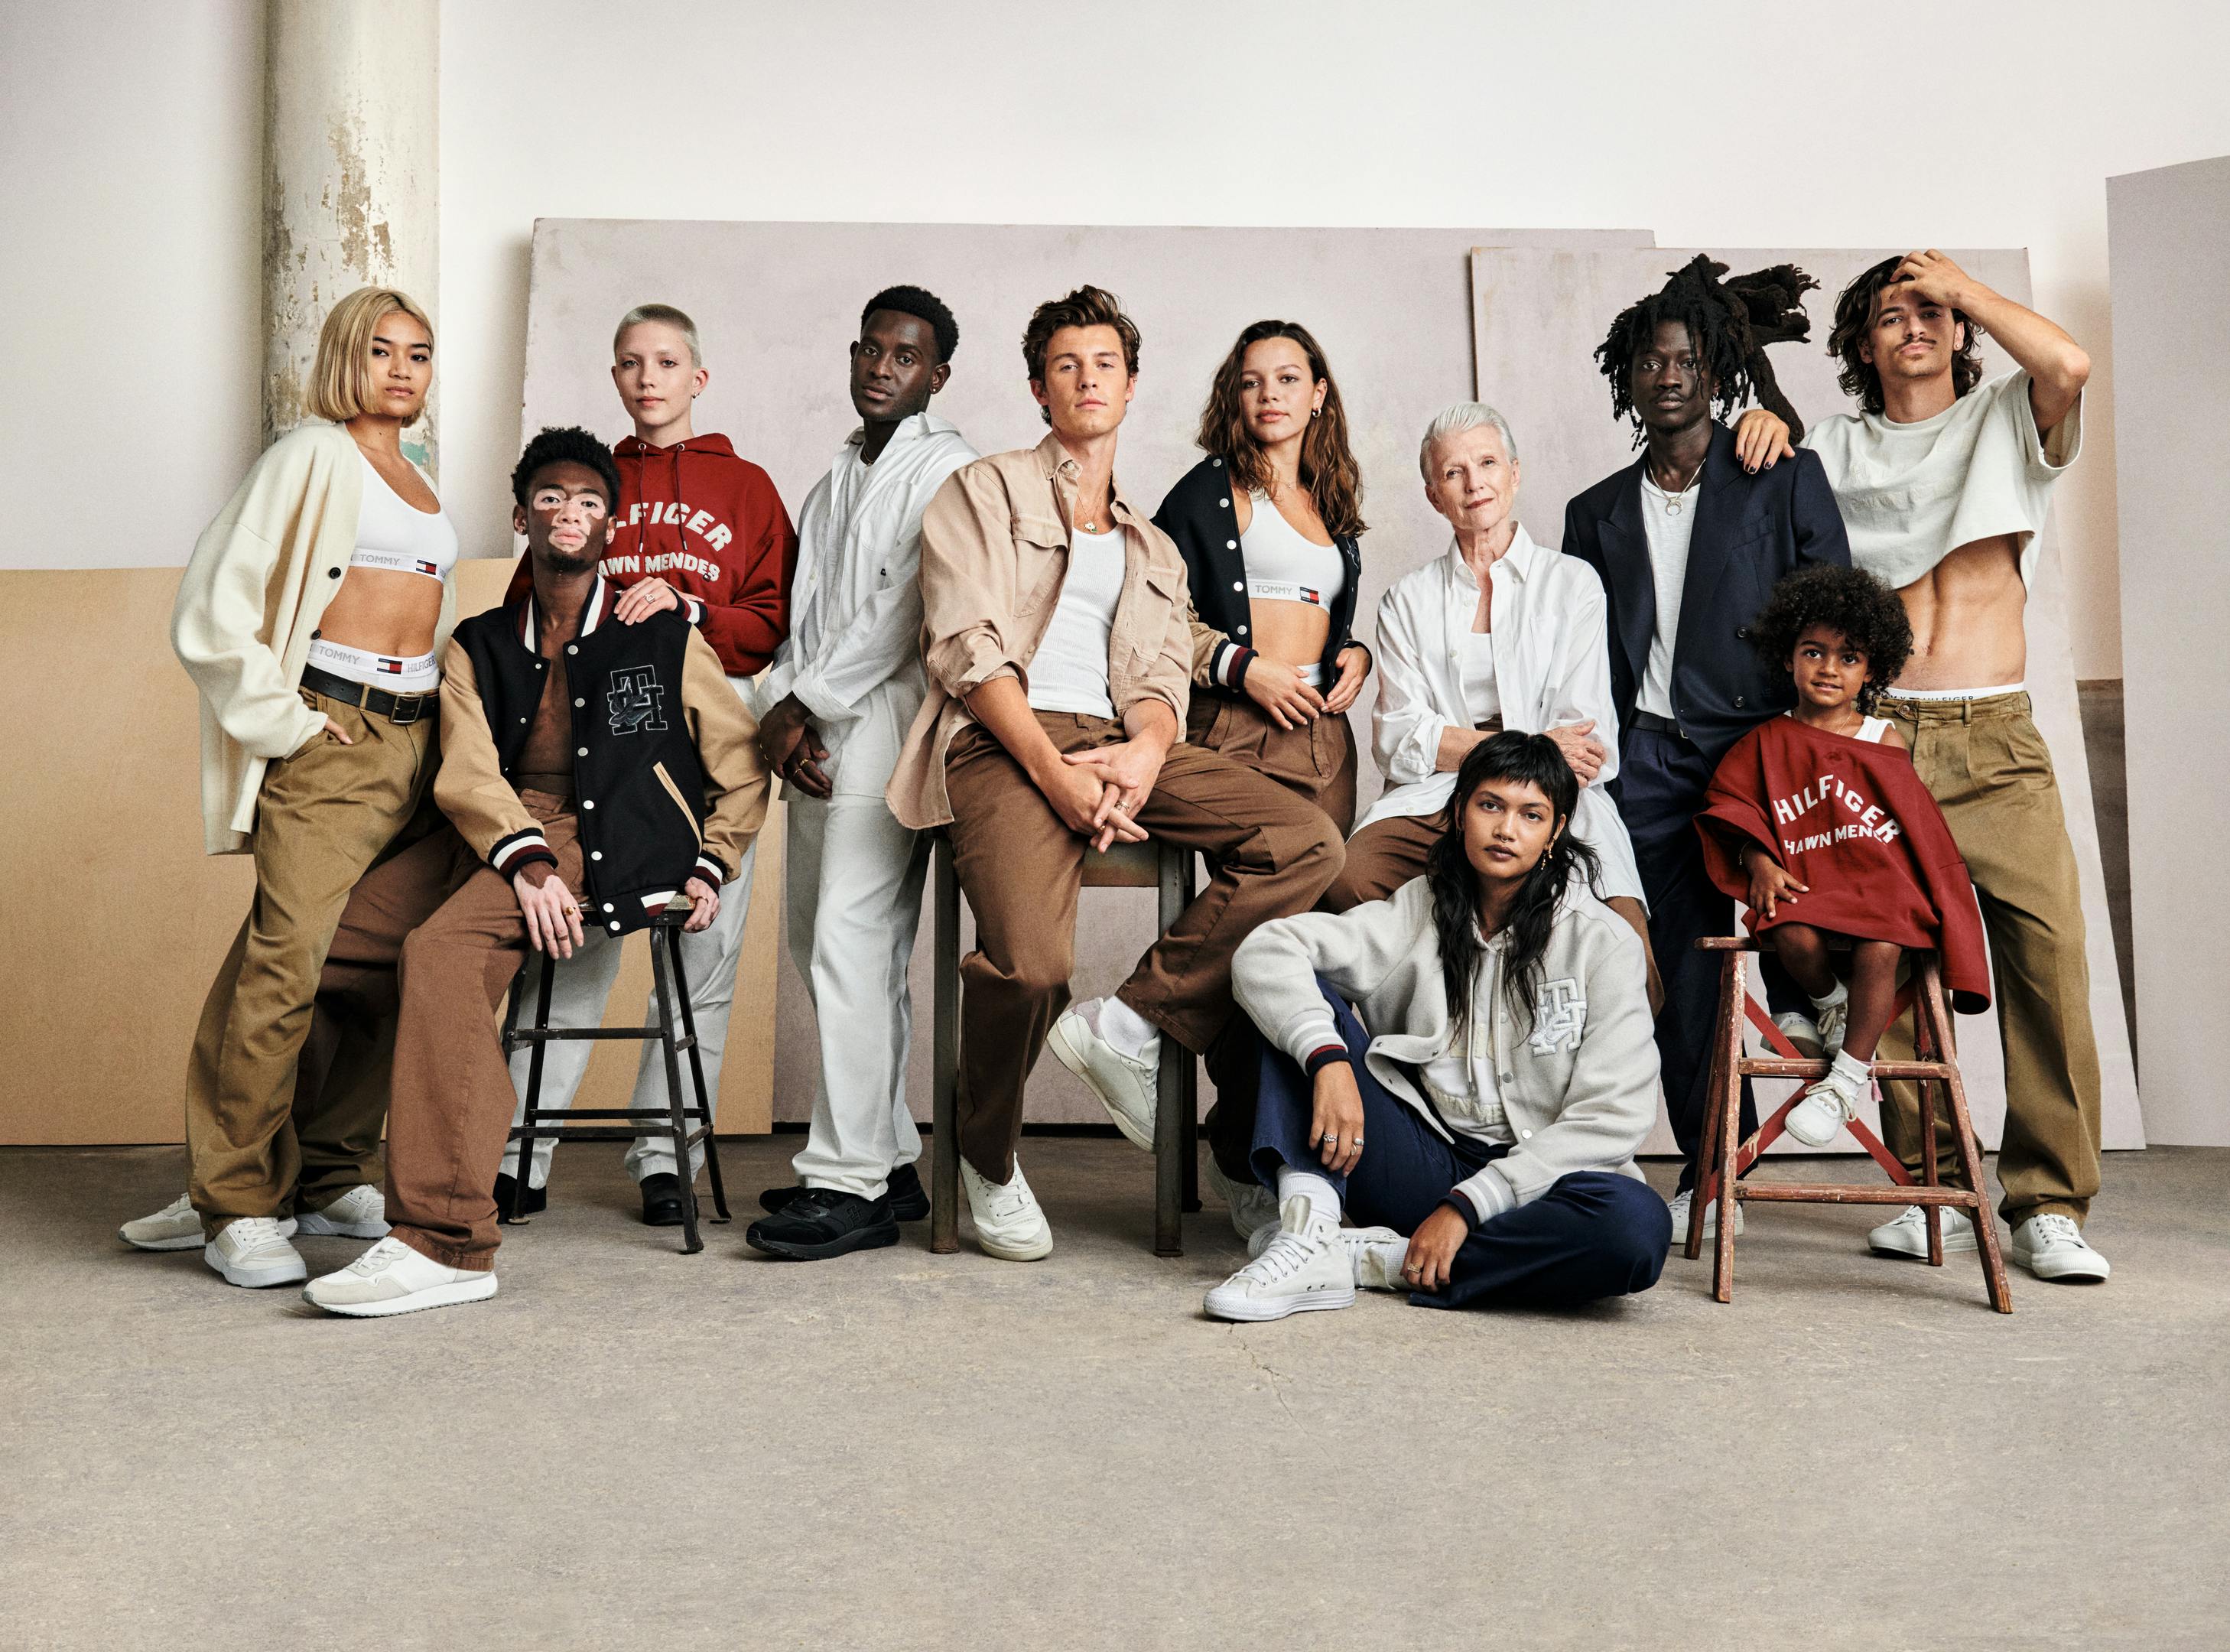 Polijsten In de omgeving van Rusland Shawn Mendes for Tommy Hilfiger, here is the new collection!